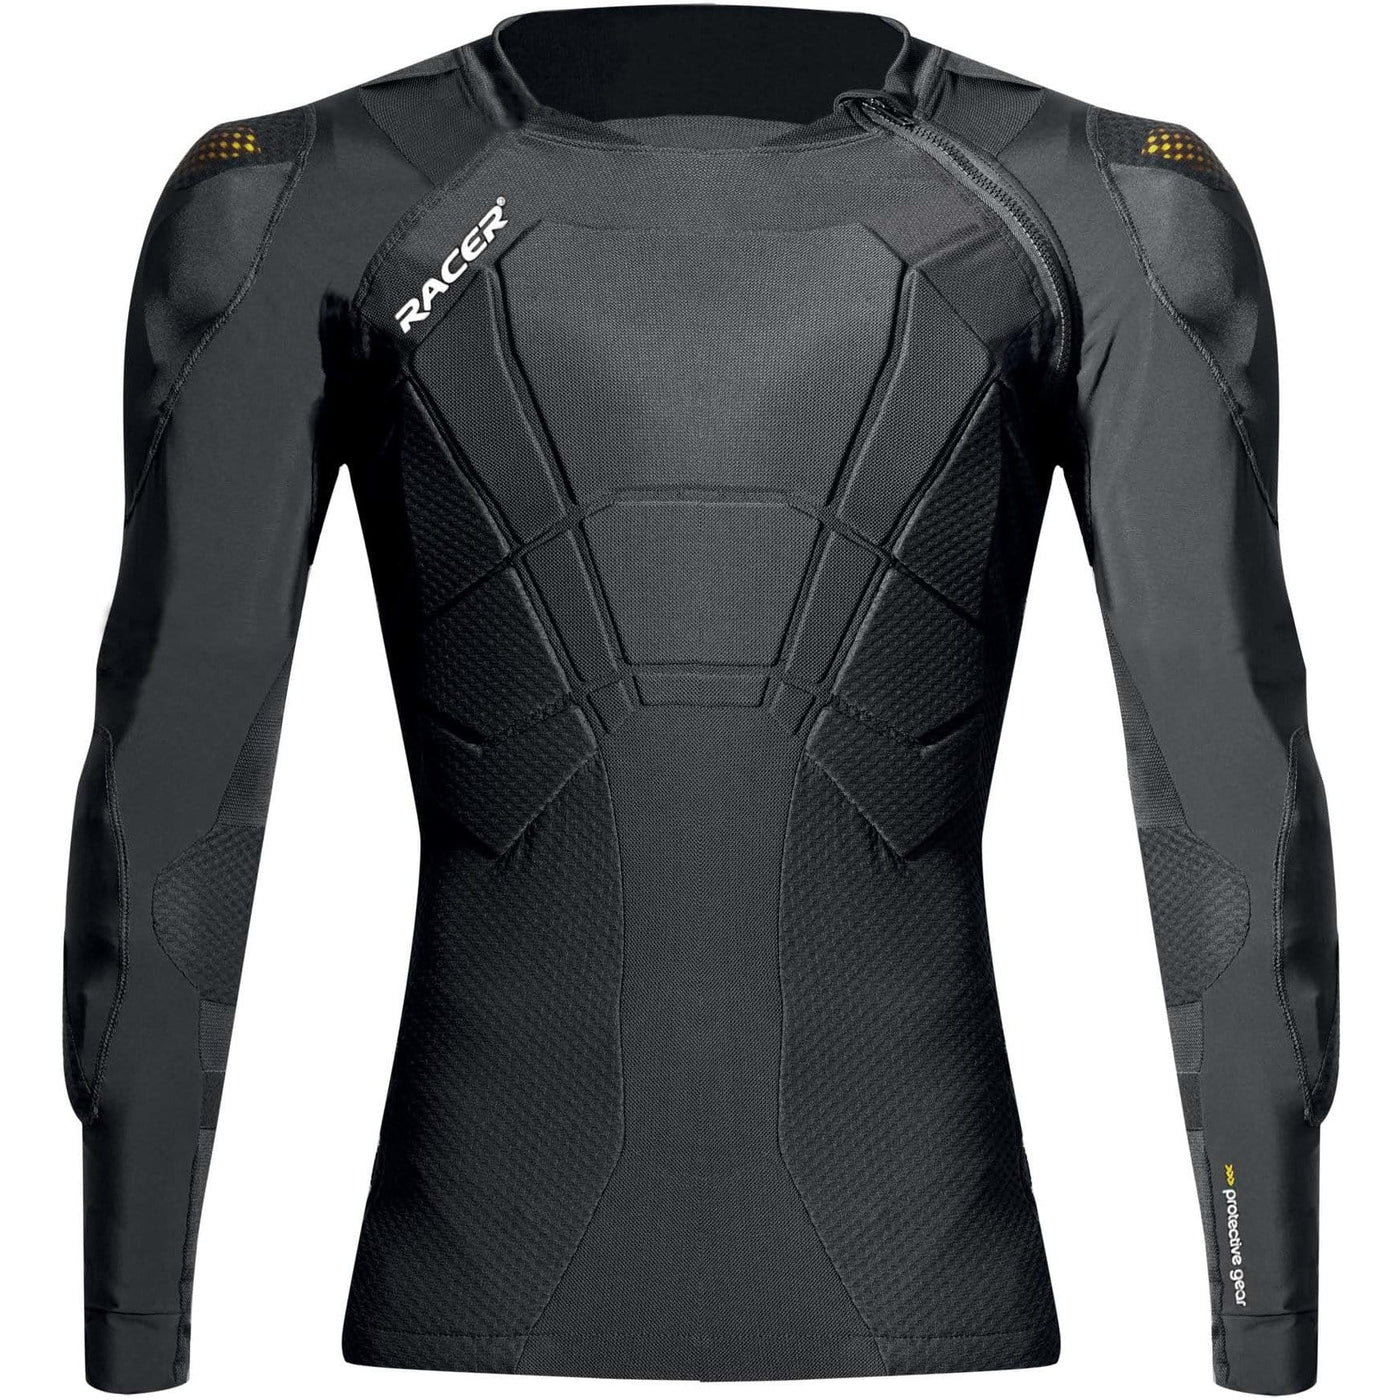 RACER France Mountain Top 2 - Body Protector 8Lines Shop - Fast Shipping